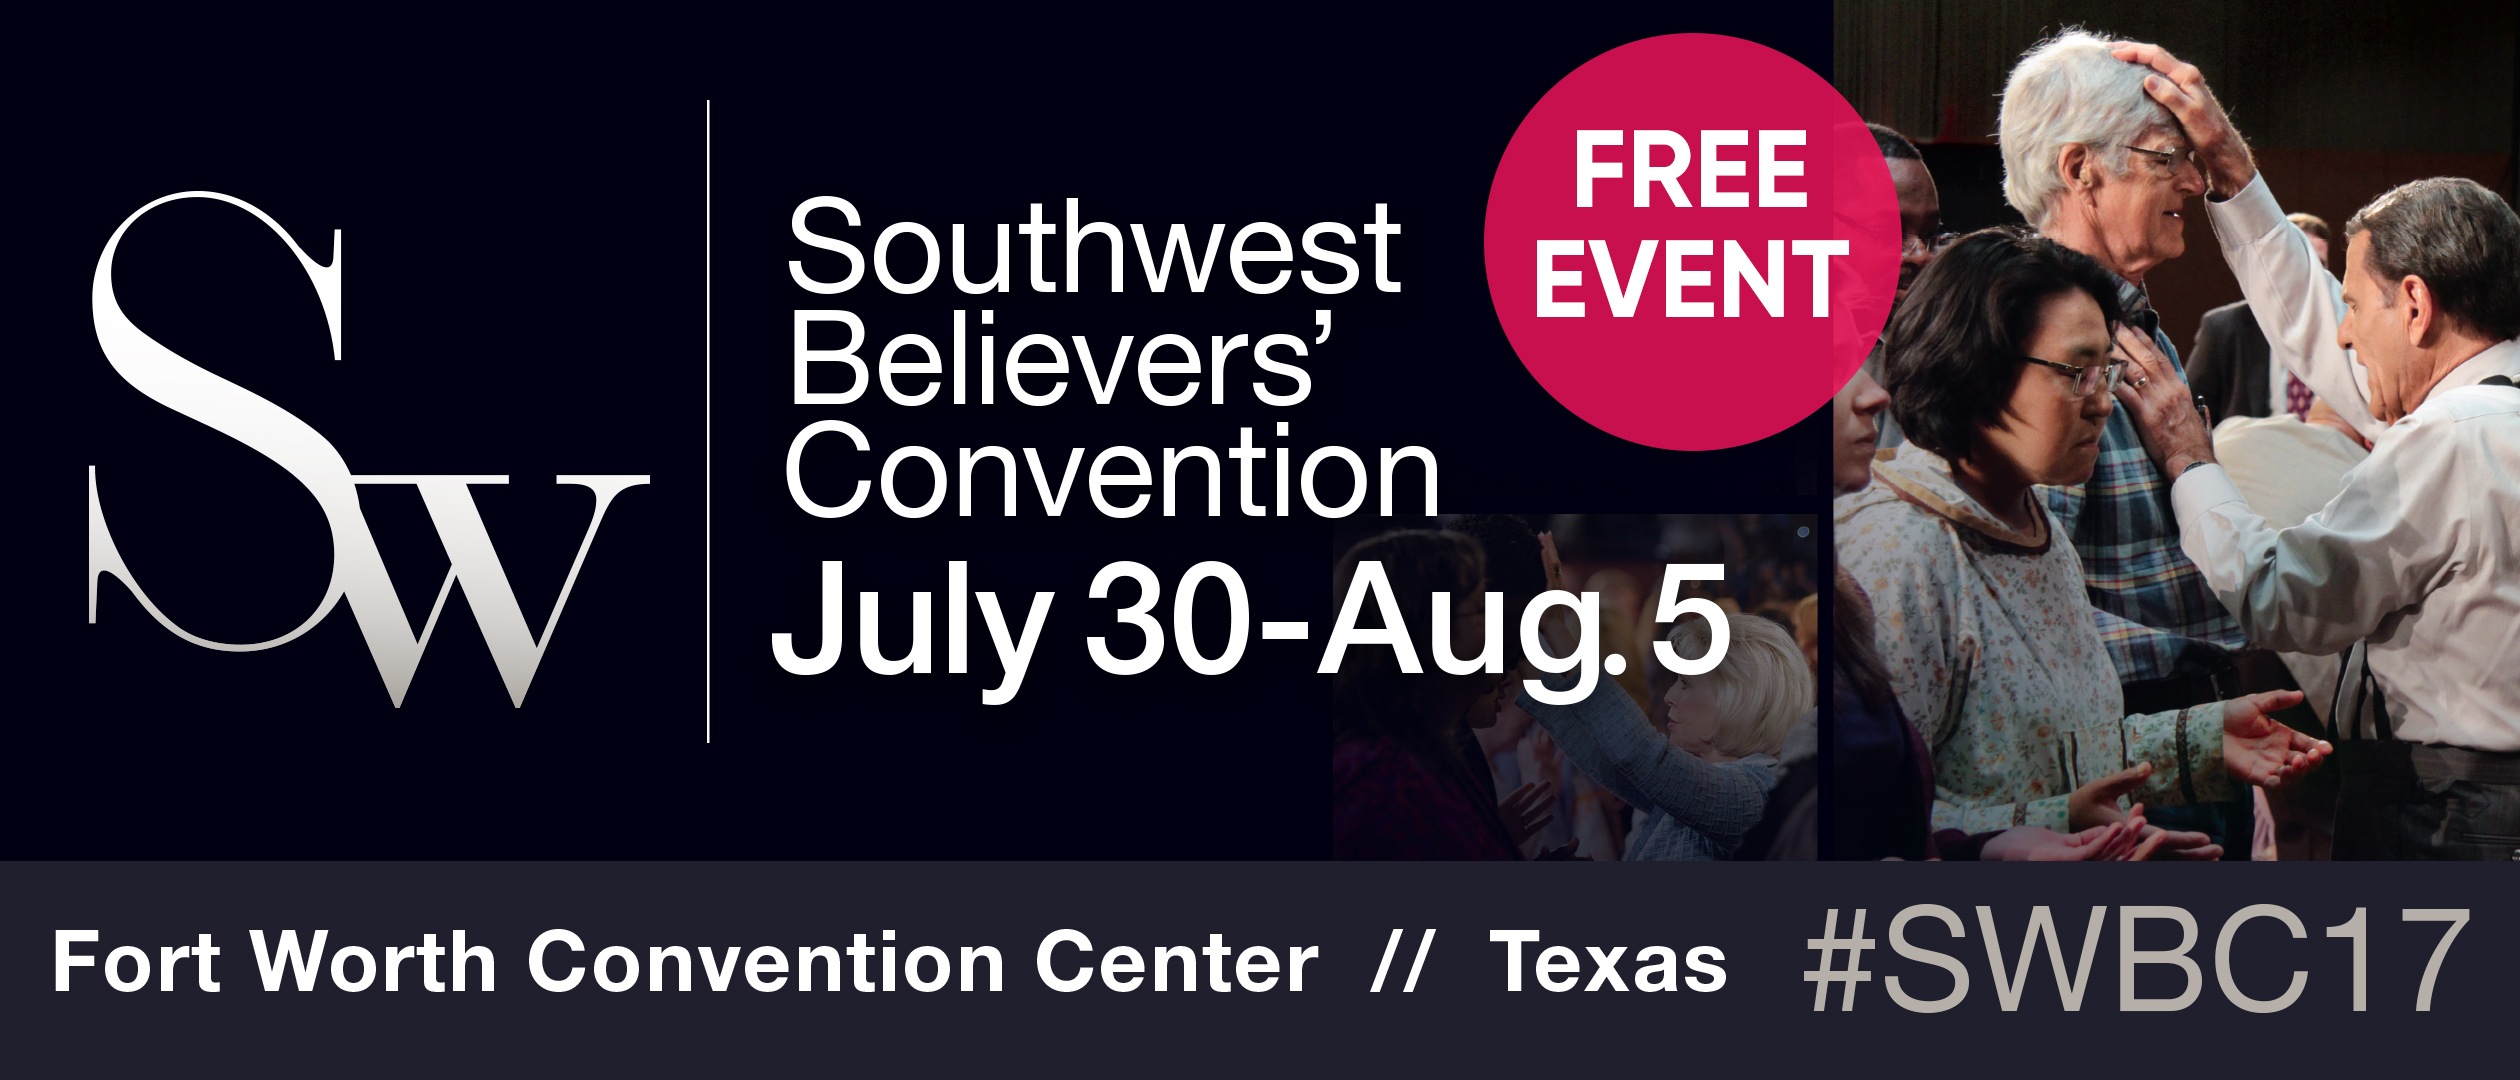 looking for a picture with "SWBC18" only brought up &#039;a no-bark dog-collar&#039; LOL but &#039;spelling-out what the hashtag-abbreviation stands-for&#039; brought this up http://gospelrnr.org/experience-fort-worth-during-2017-southwest-believers-convention/